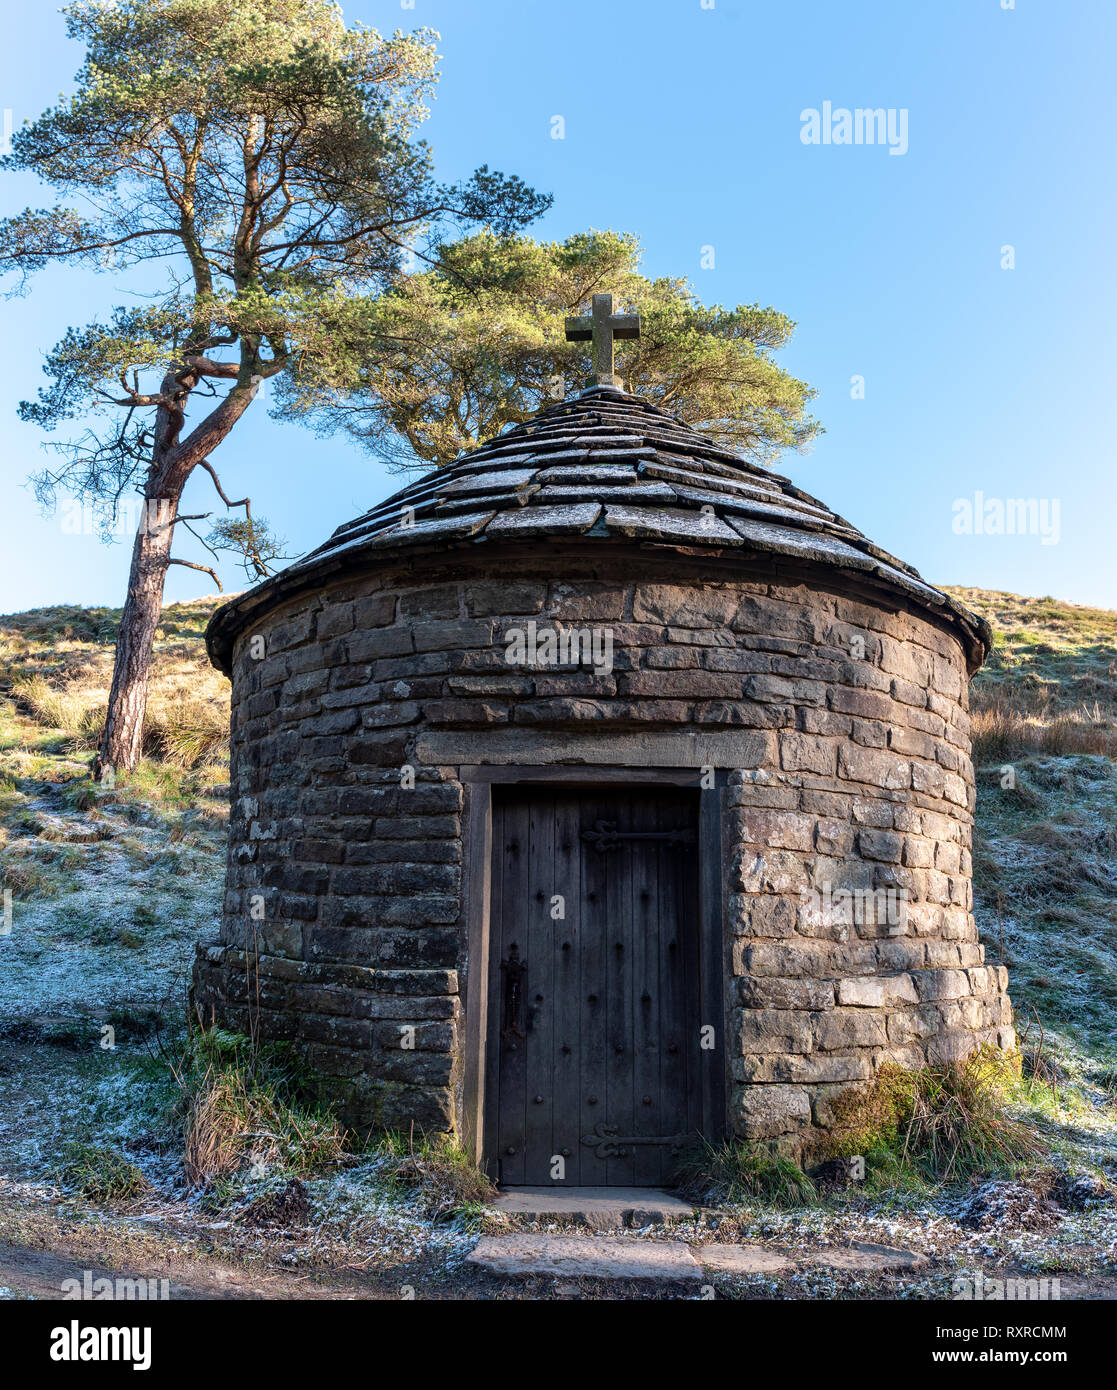 St Joseph's shrine at Goyt valley within the Peak District National Park. Stock Photo